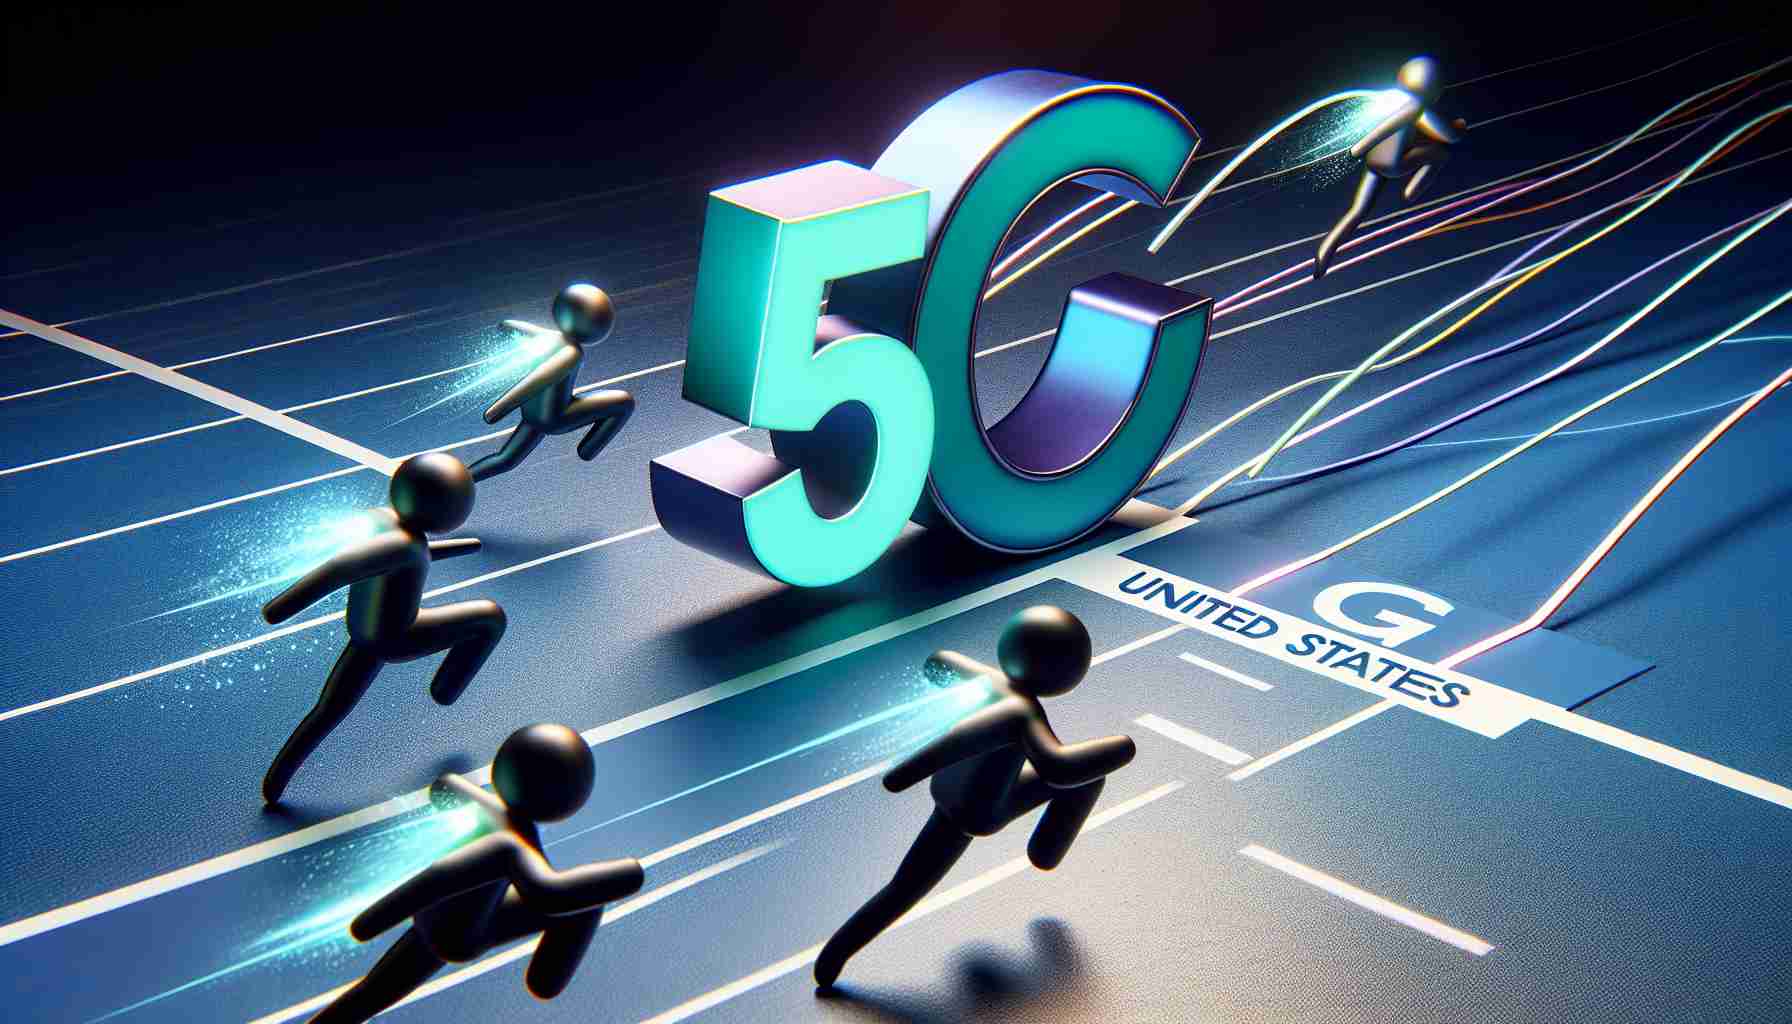 Galaxy Leads the 5G Smartphone Satisfaction Race in the United States